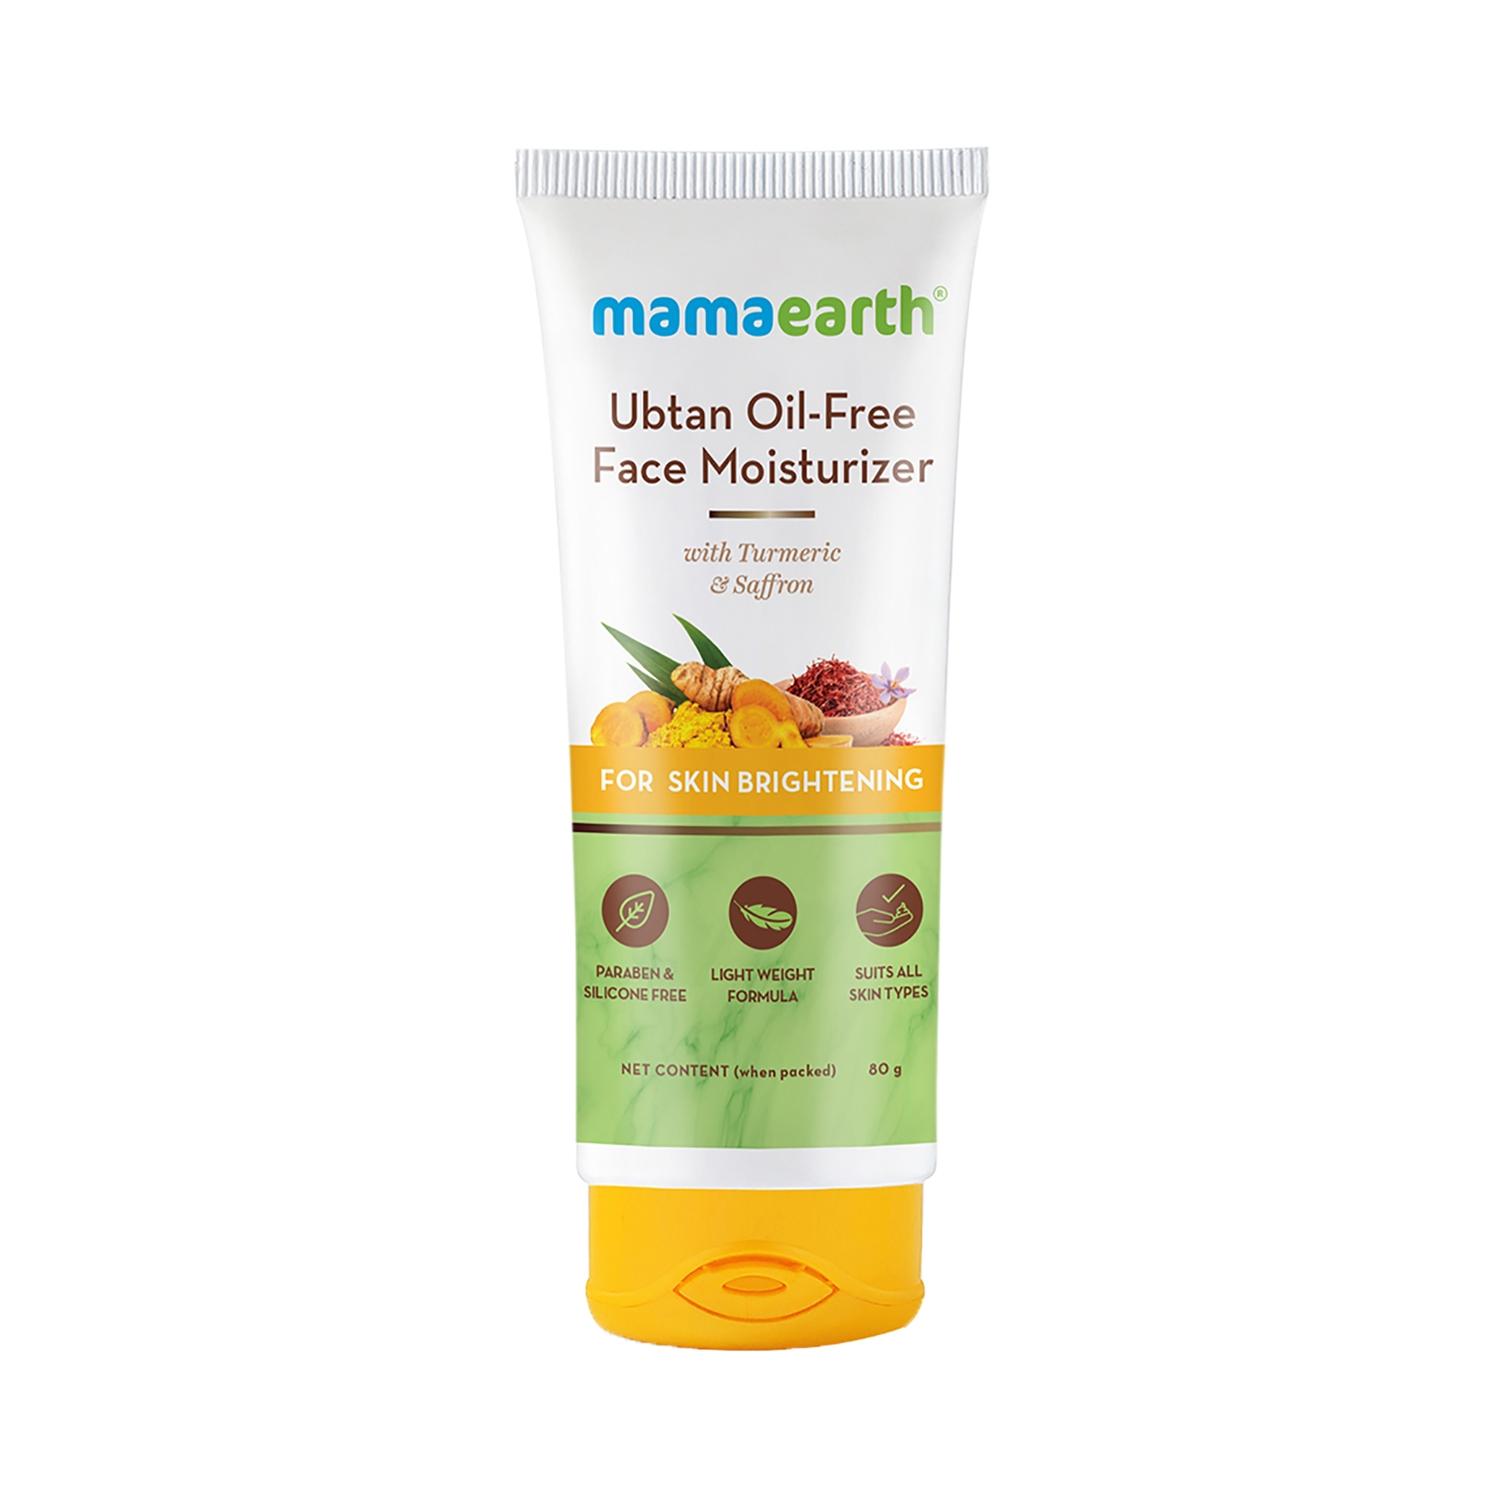 mamaearth ubtan oil-free face moisturizer with turmeric & saffron for skin brightening (80g)